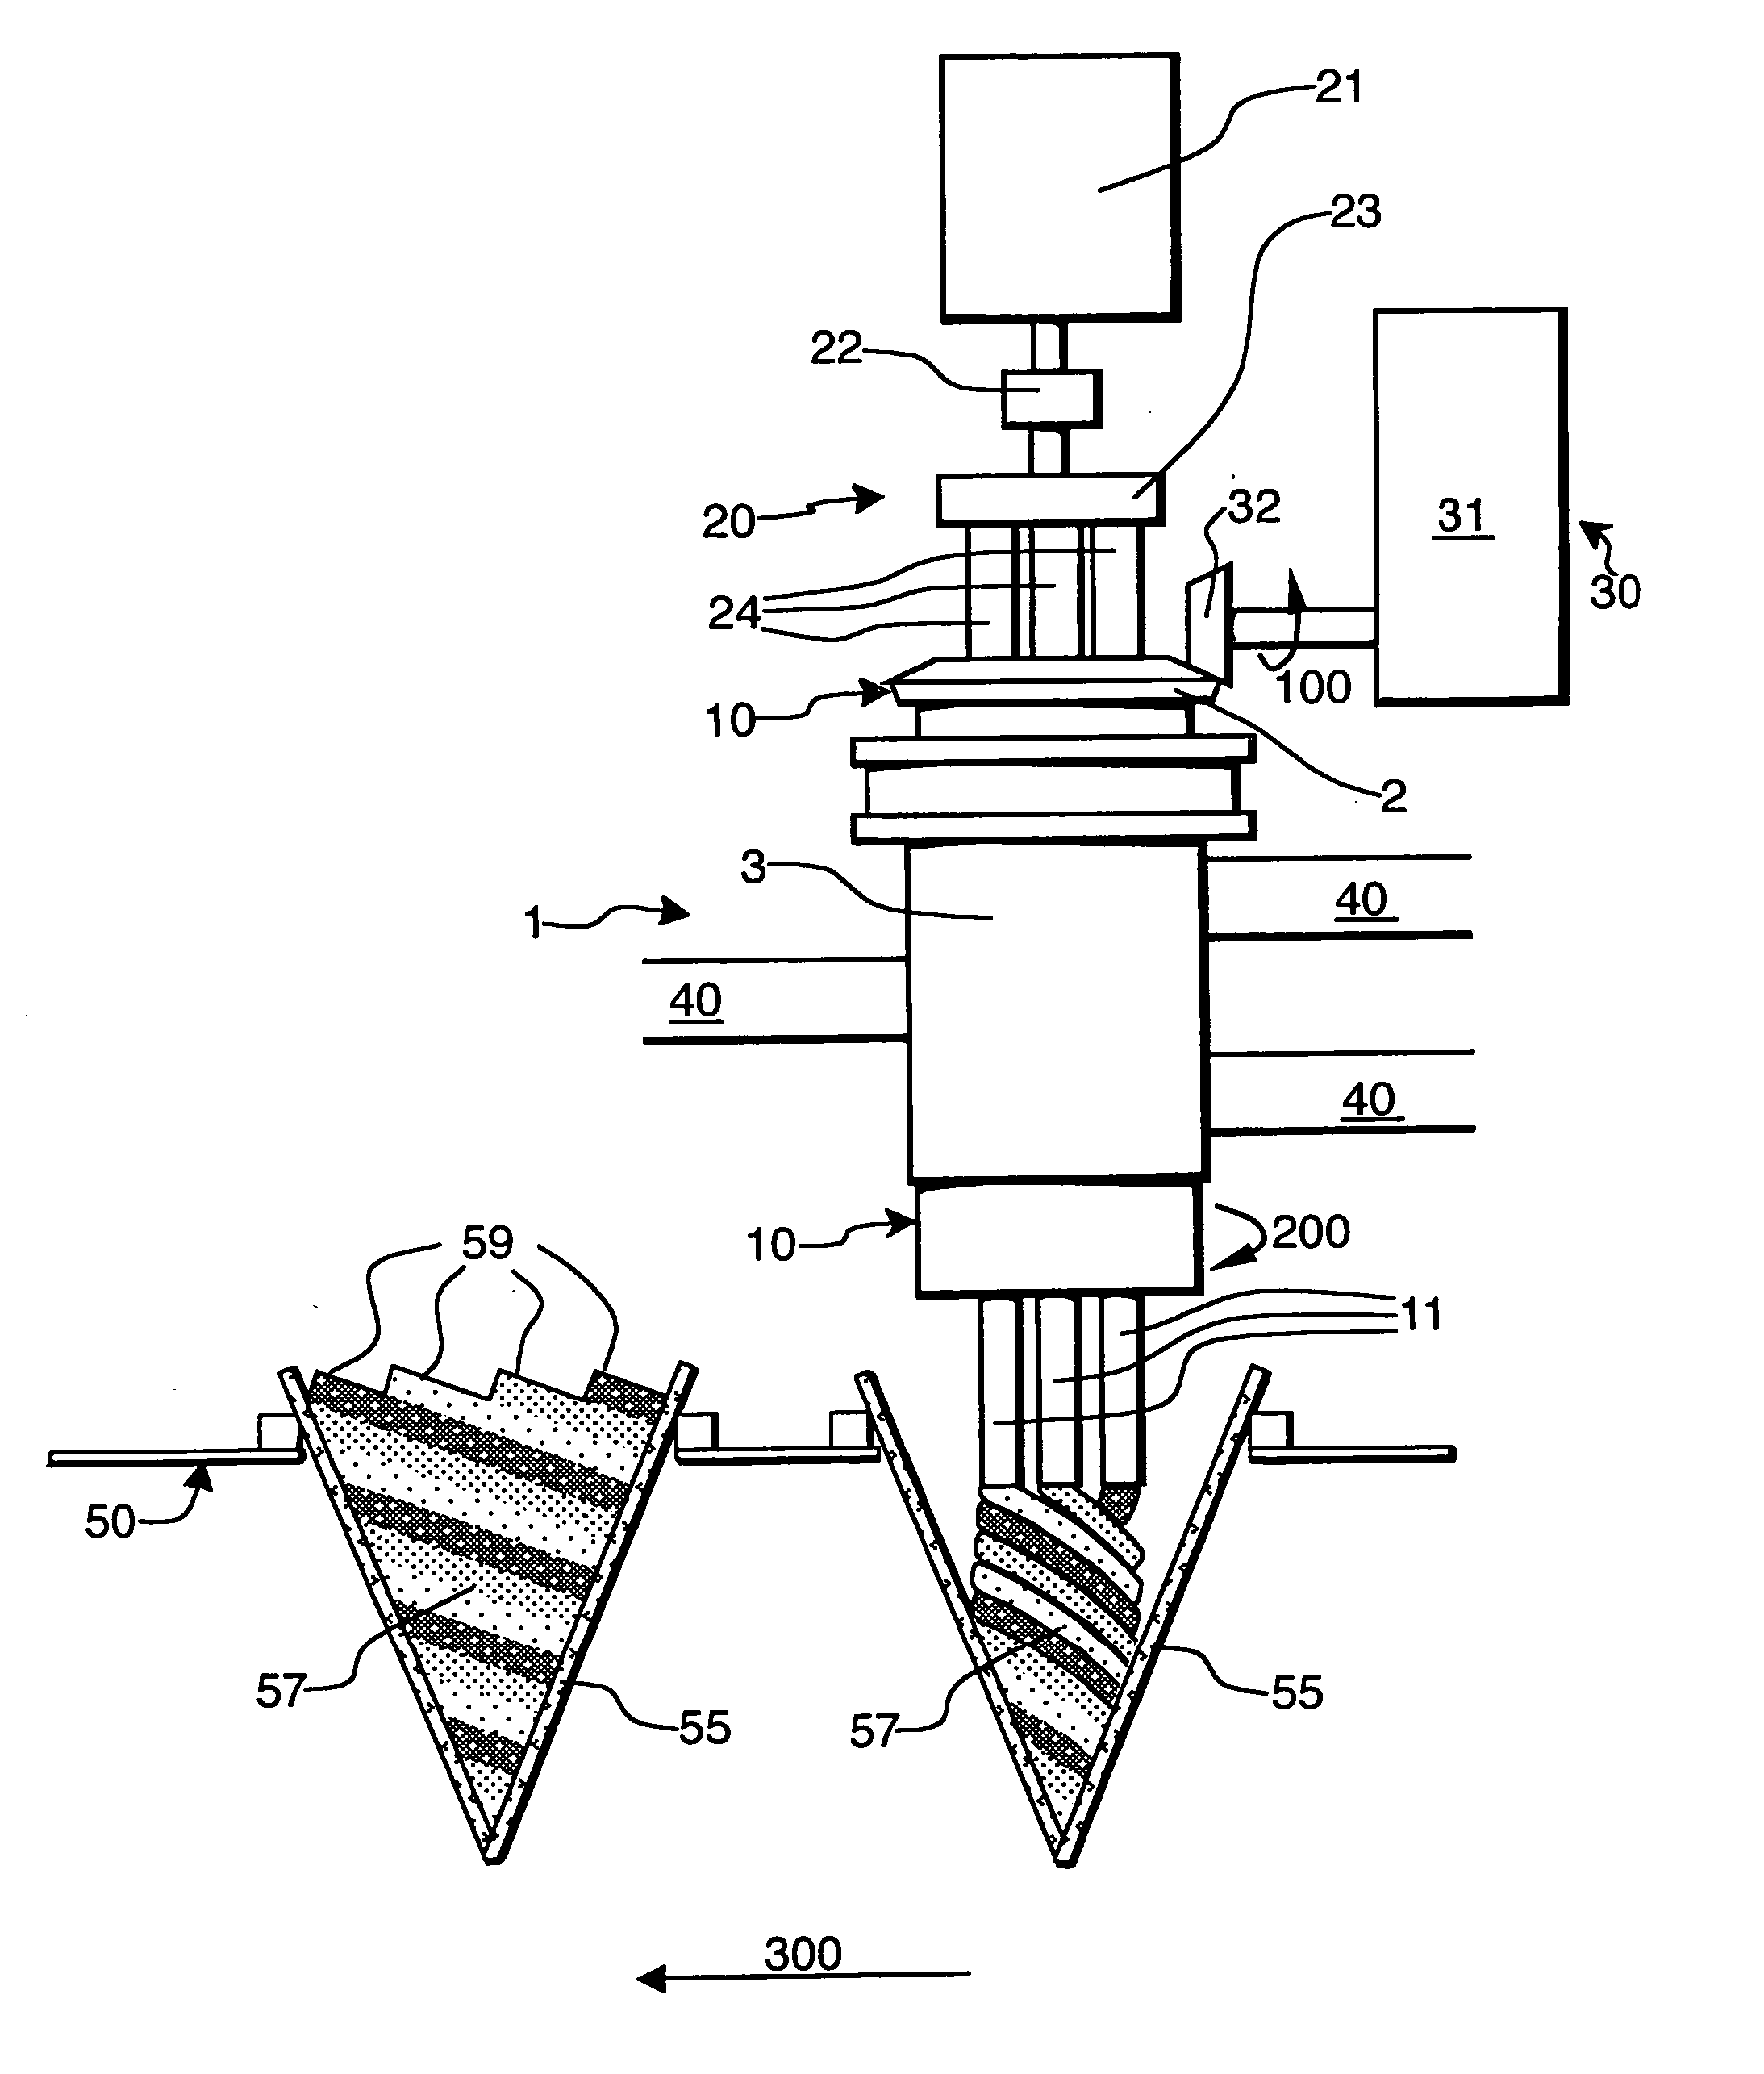 Apparatus and process for preparing a frozen confection